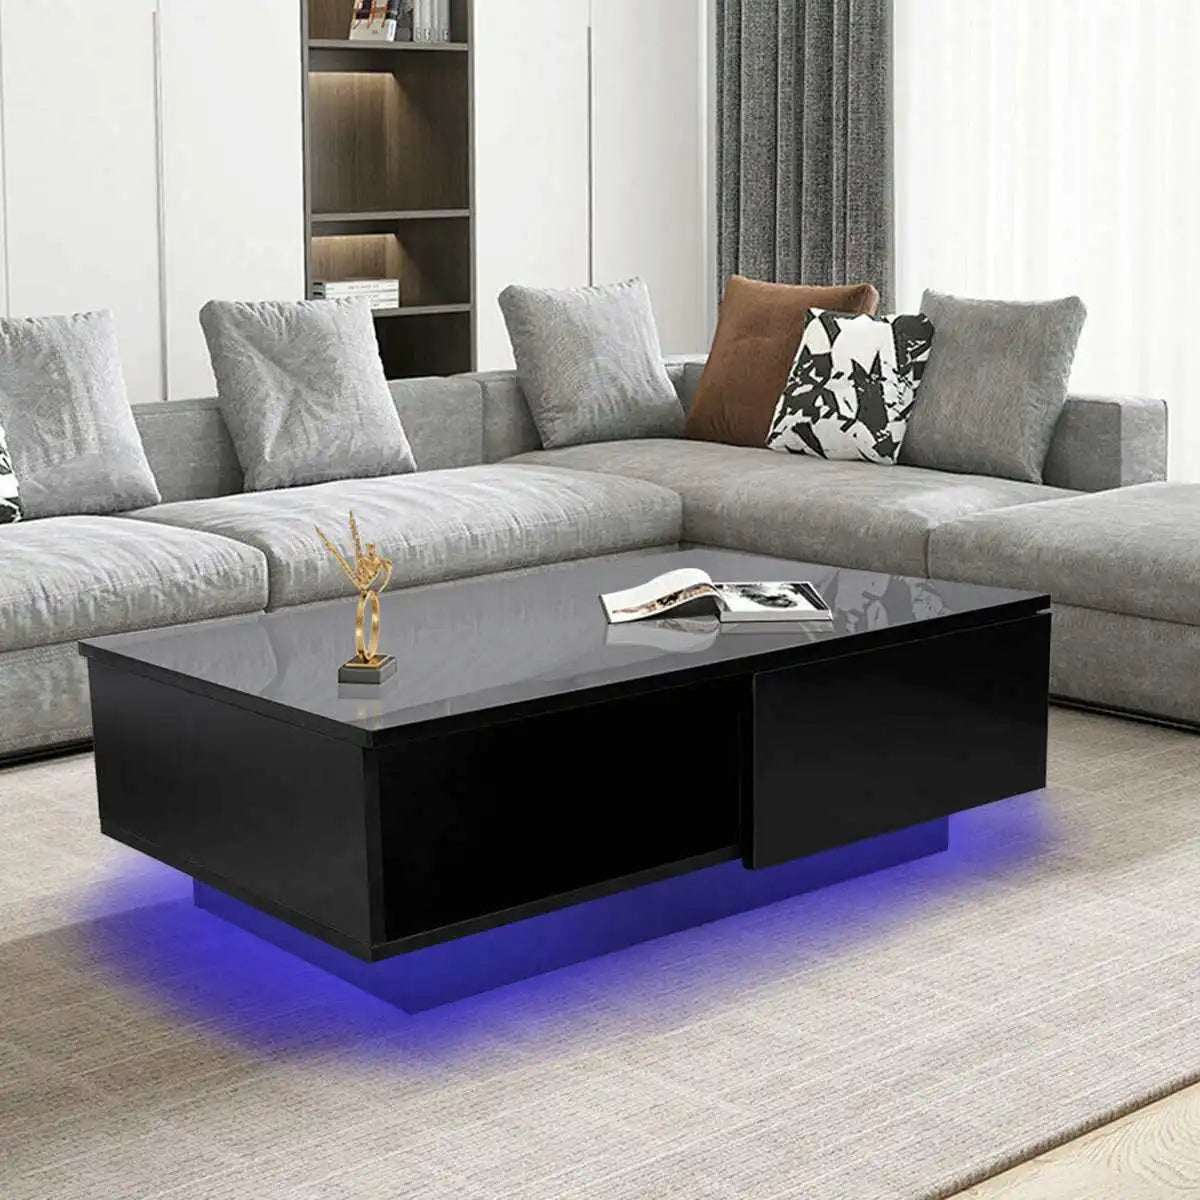 Nordic LED End Table High Gloss Coffee Tables RGB Nordic Modern Side Table Living Room Drawers Cabinet Storage Organizer Furniture ShopOnlyDeal